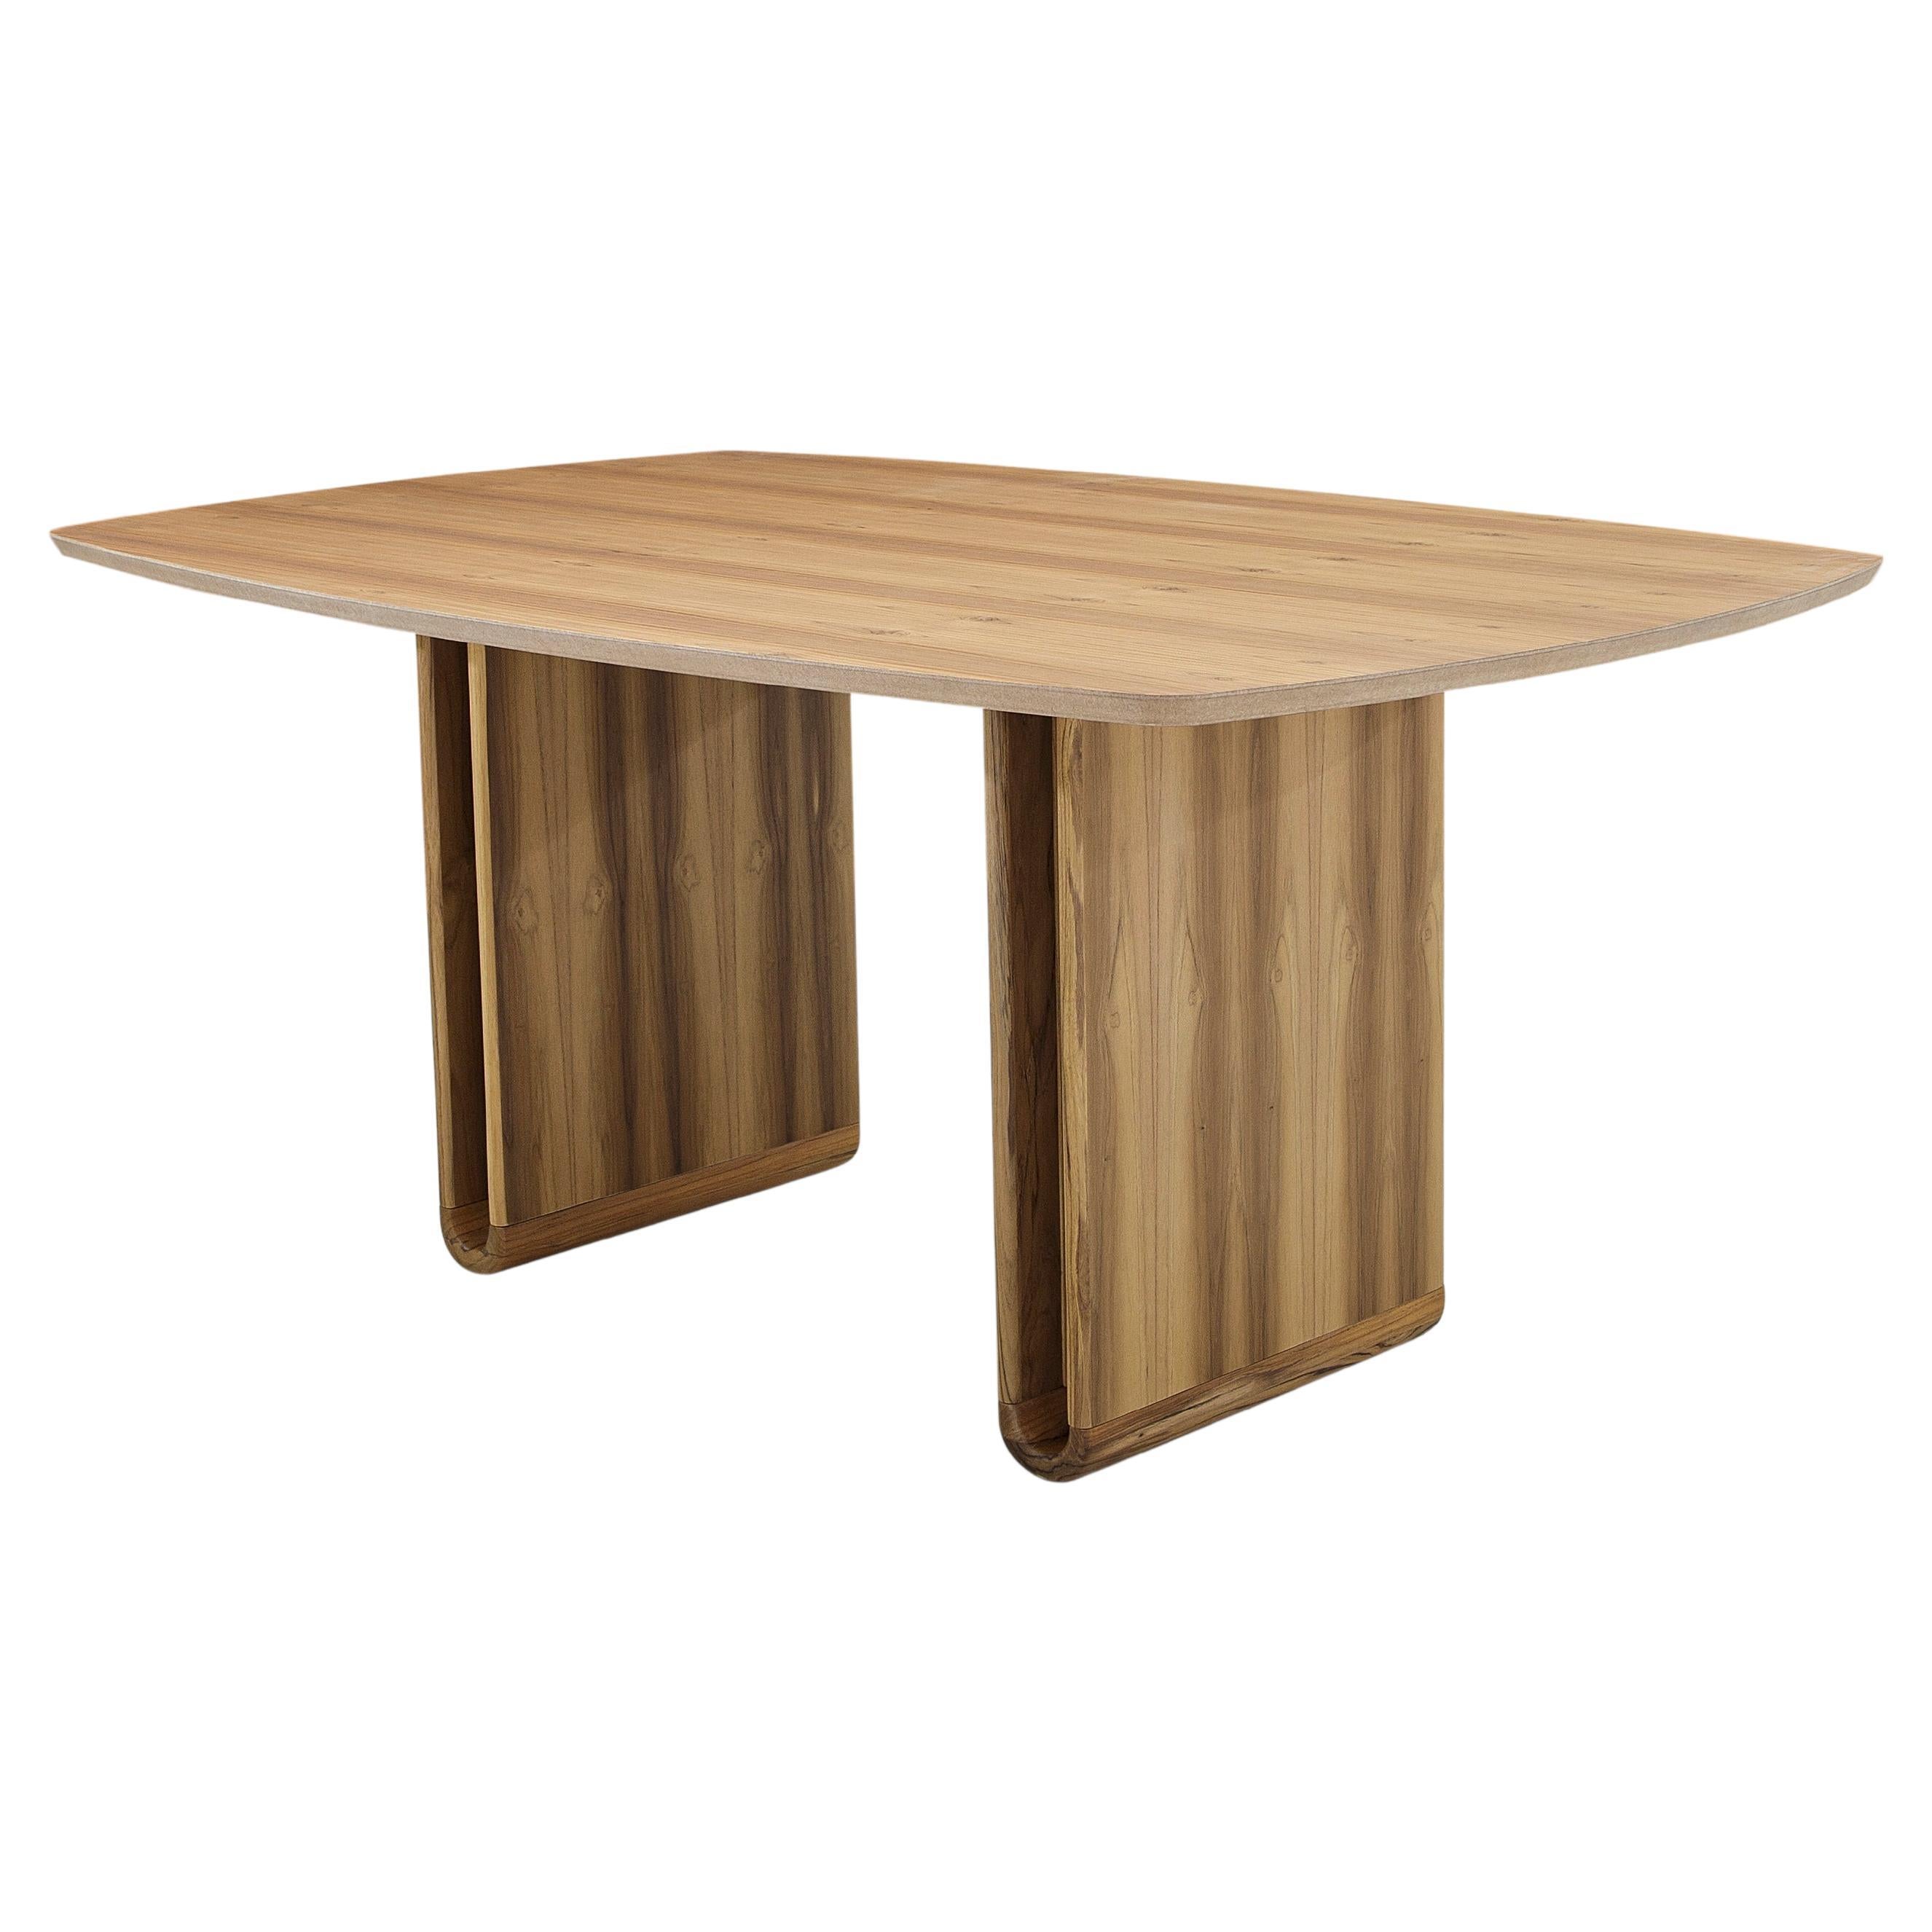 The refined shapes of the Neon dining table in teak make it a uniquely shaped addition to your dining room. It is a sophisticated table for a modern contemporary or minimalist decor with symmetrical proportions along with the curved detail of the